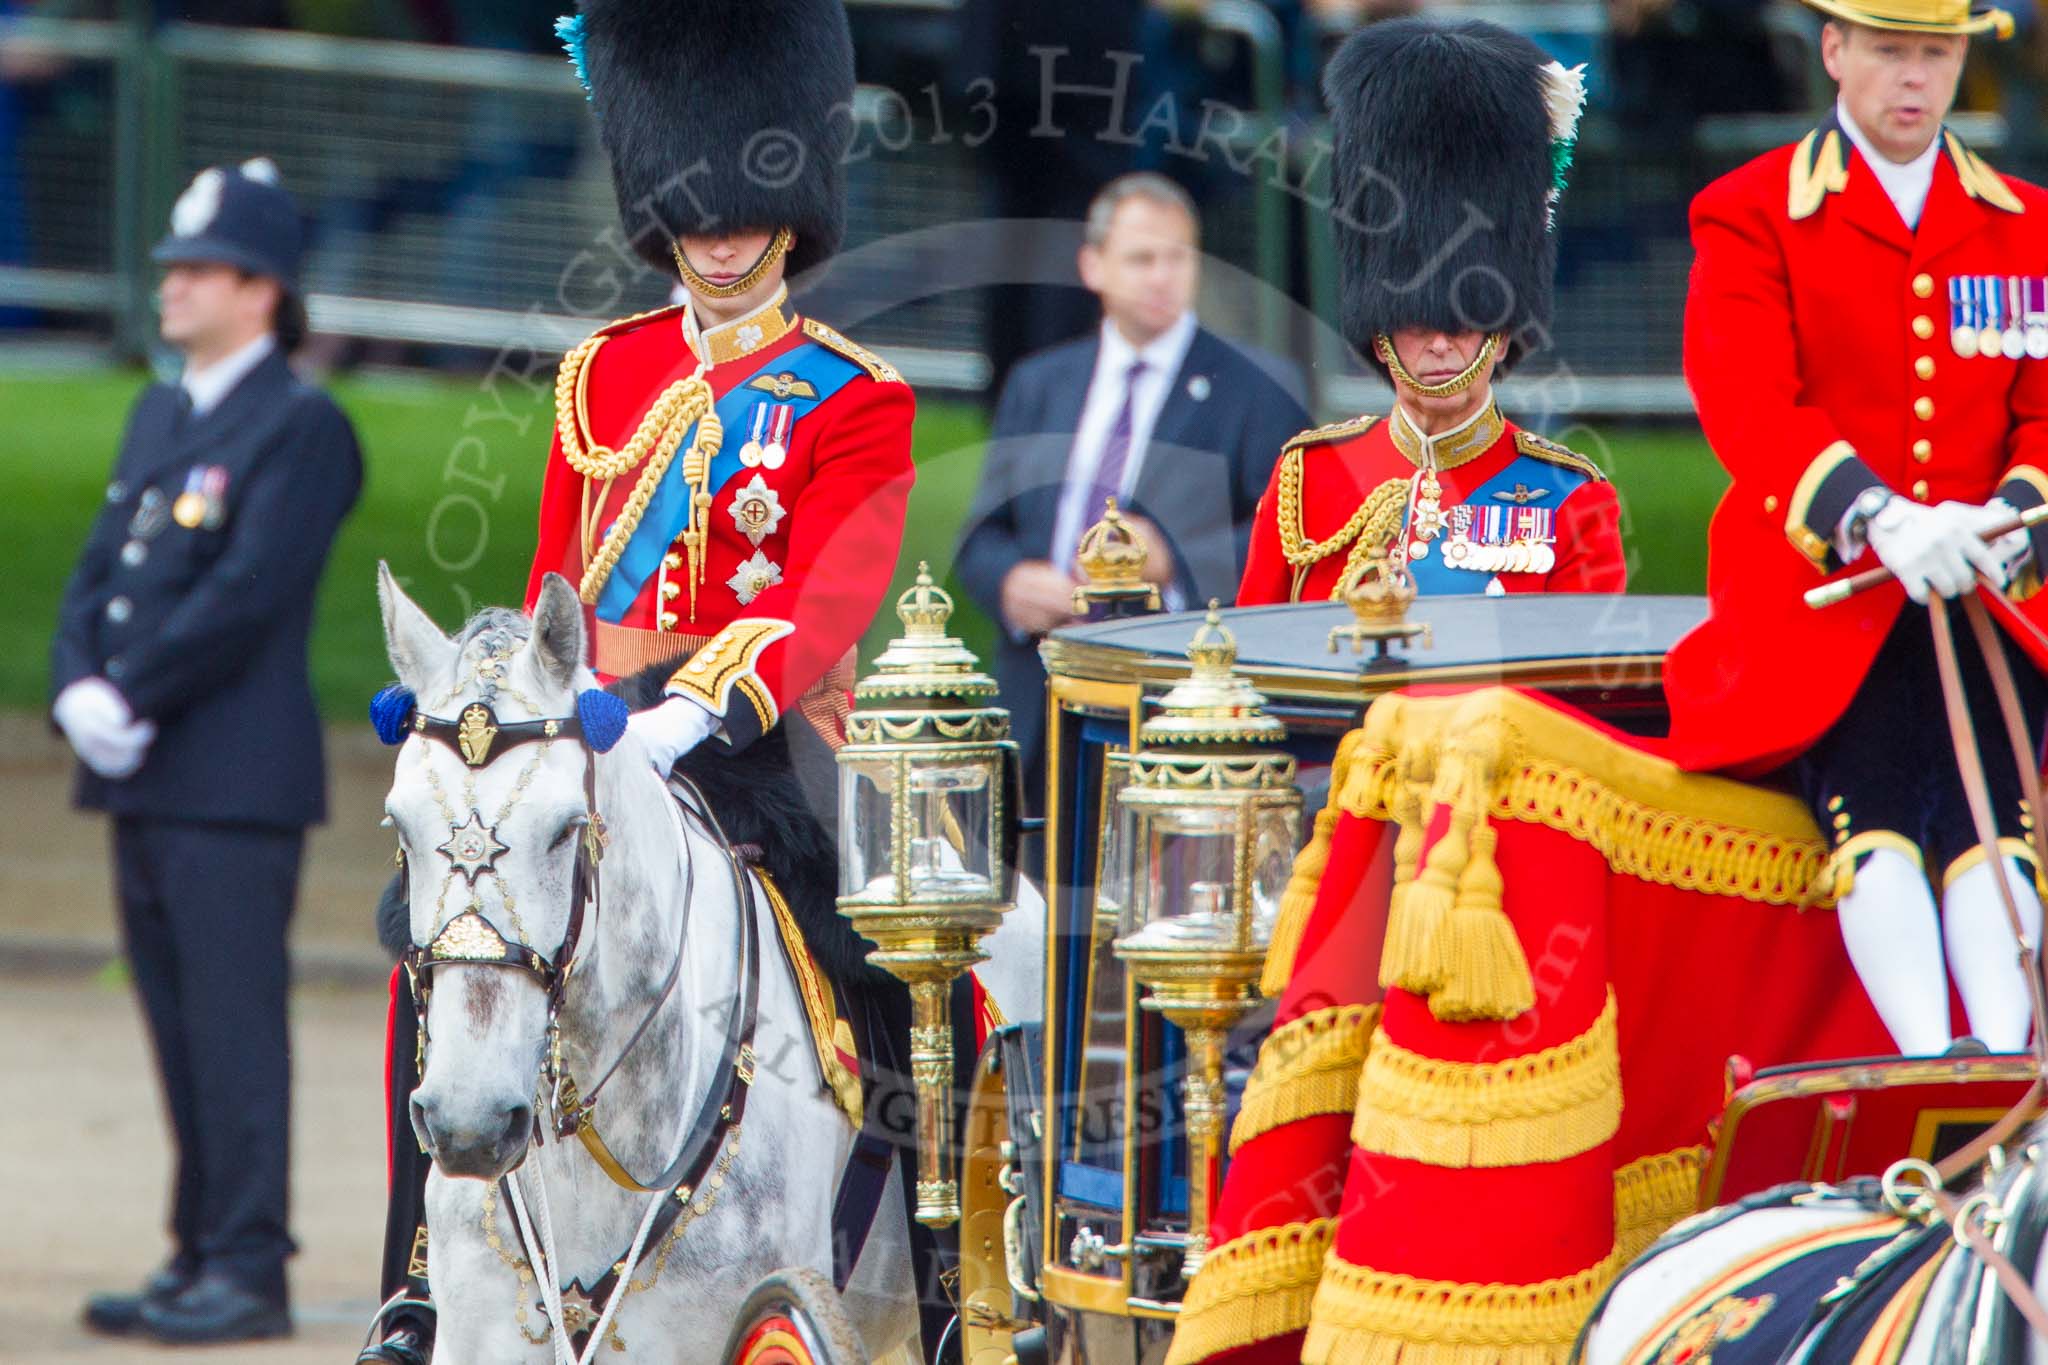 Trooping the Colour 2013: HRH The Duke of Cambridge, Colonel Irish Guards and HRH The Prince of Wales, Colonel Welsh Guards, Royal Colonelsm seen behind the Glass Coach carrying HM The Queen after the Inspection of the Line..
Horse Guards Parade, Westminster,
London SW1,

United Kingdom,
on 15 June 2013 at 11:06, image #358